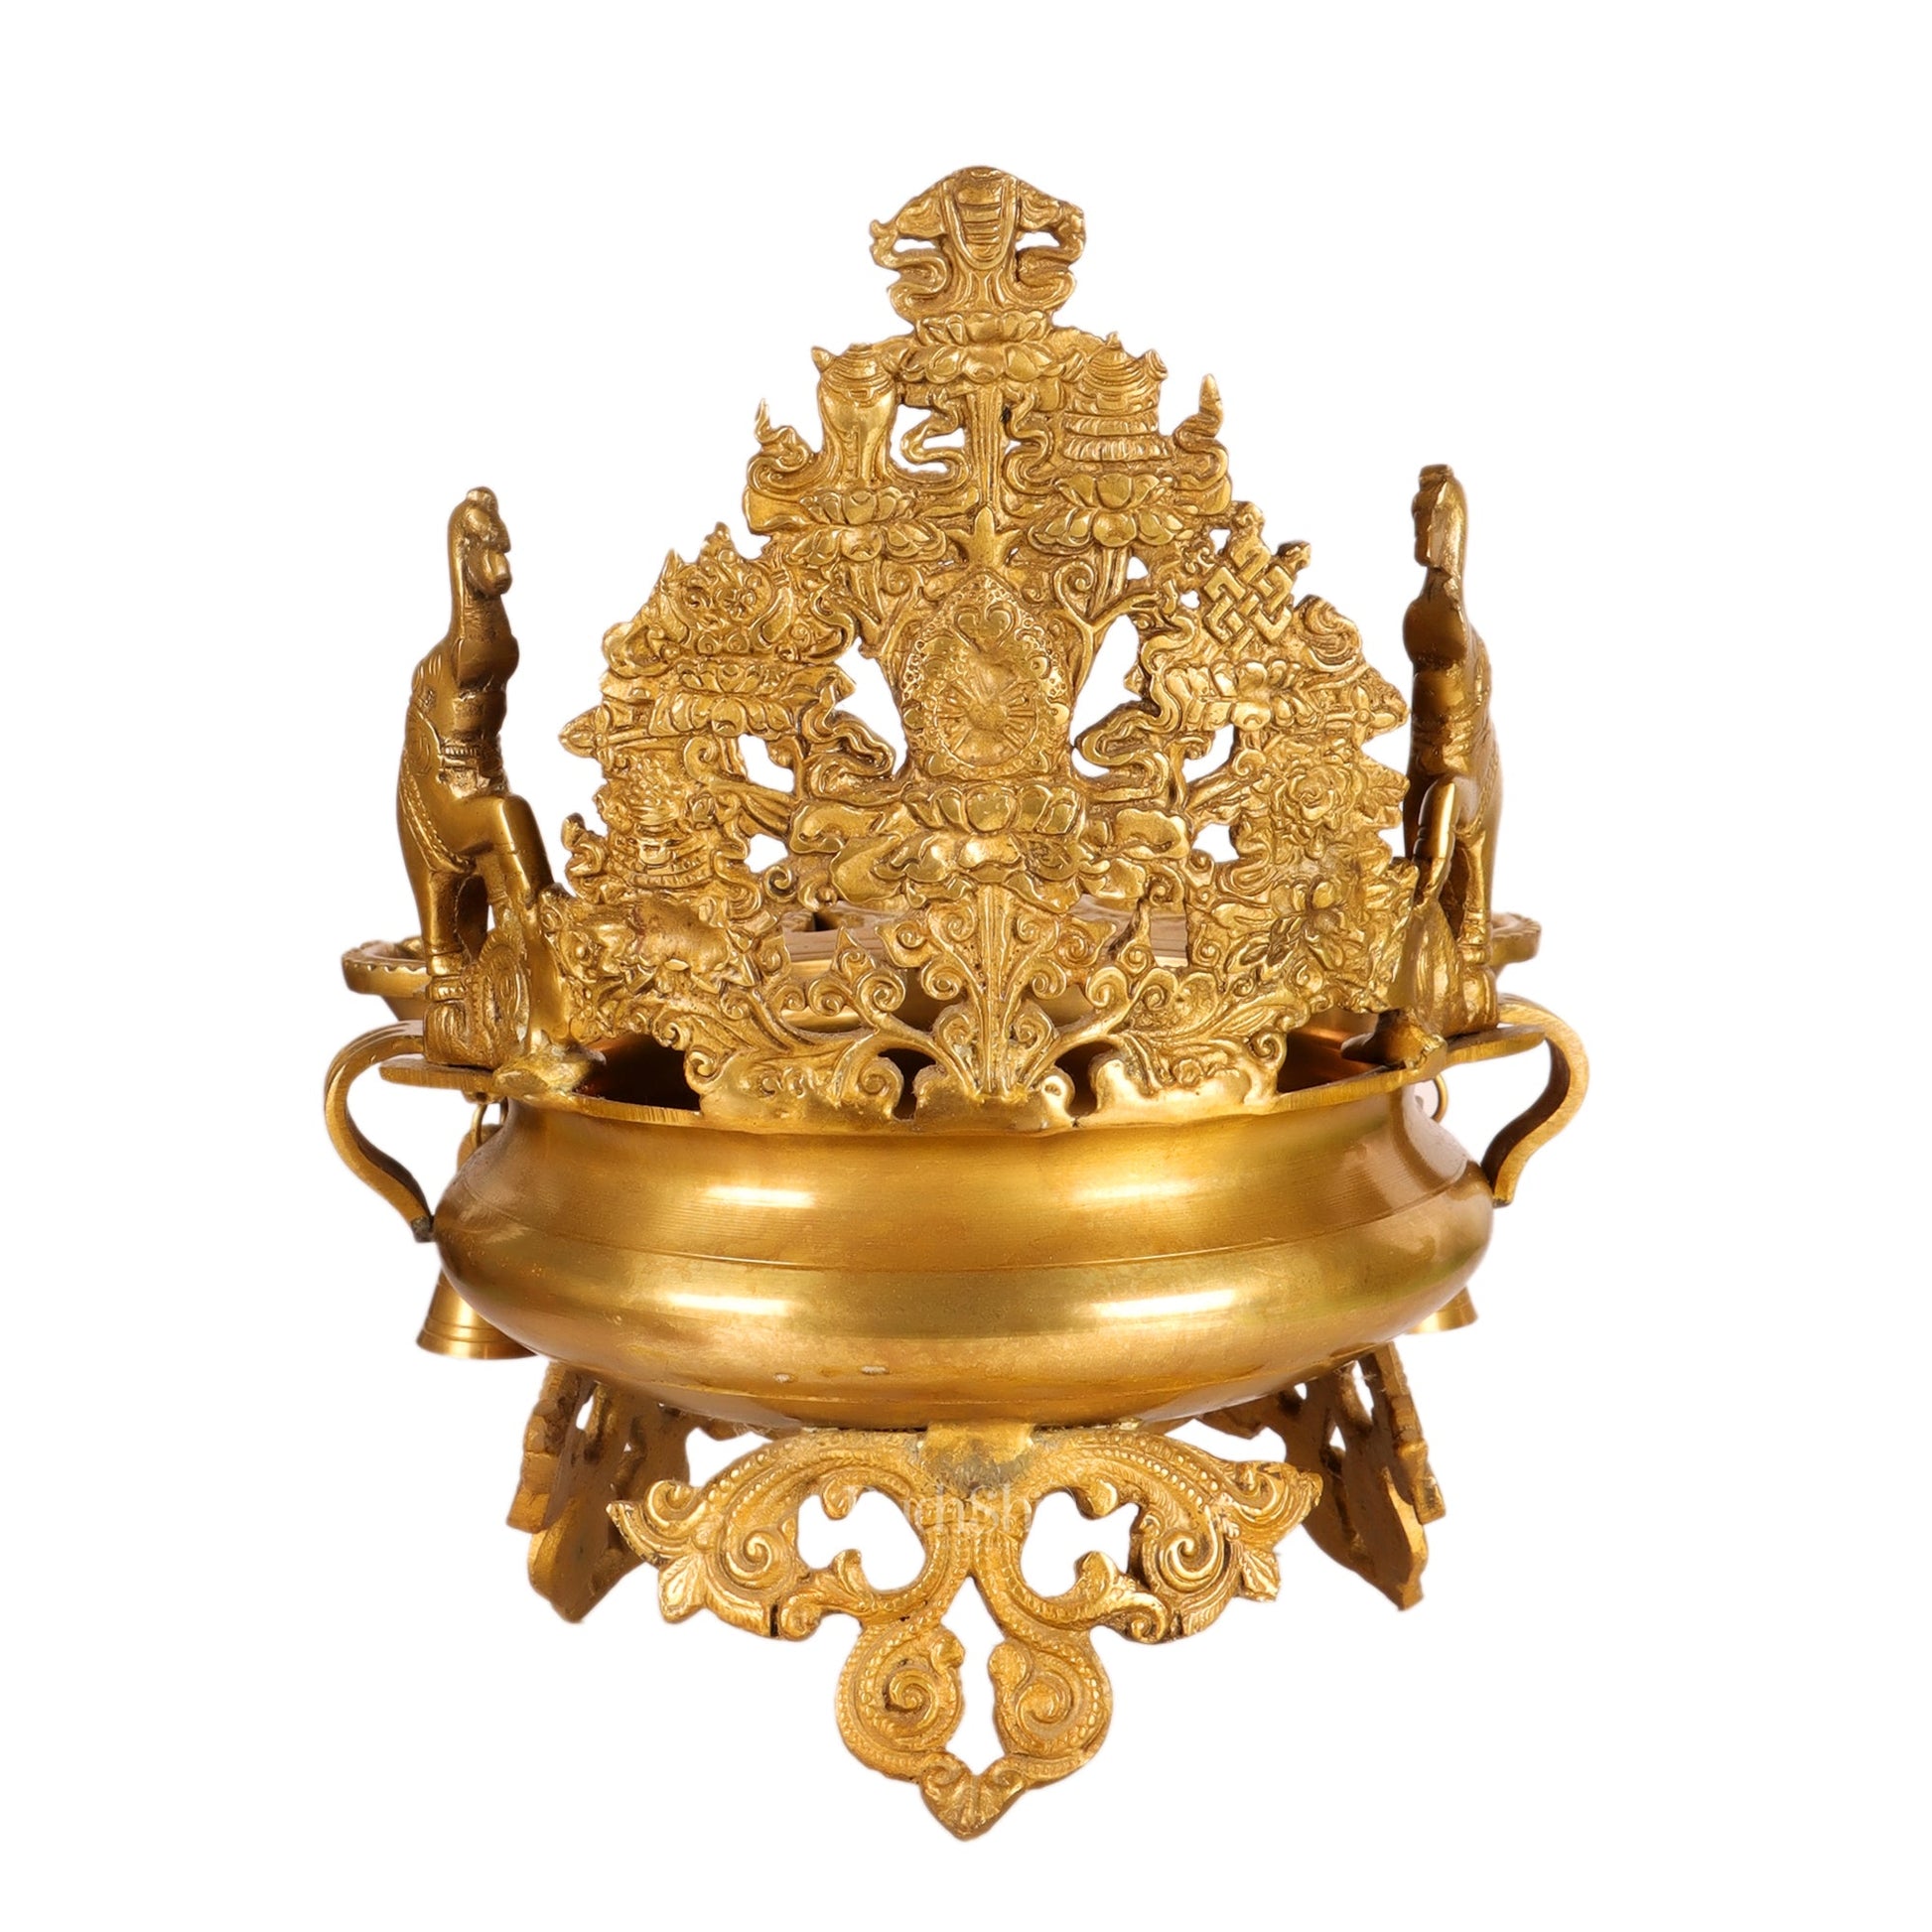 Brass Panchdeep large urli with bells with engraved back frame 12" - Budhshiv.com